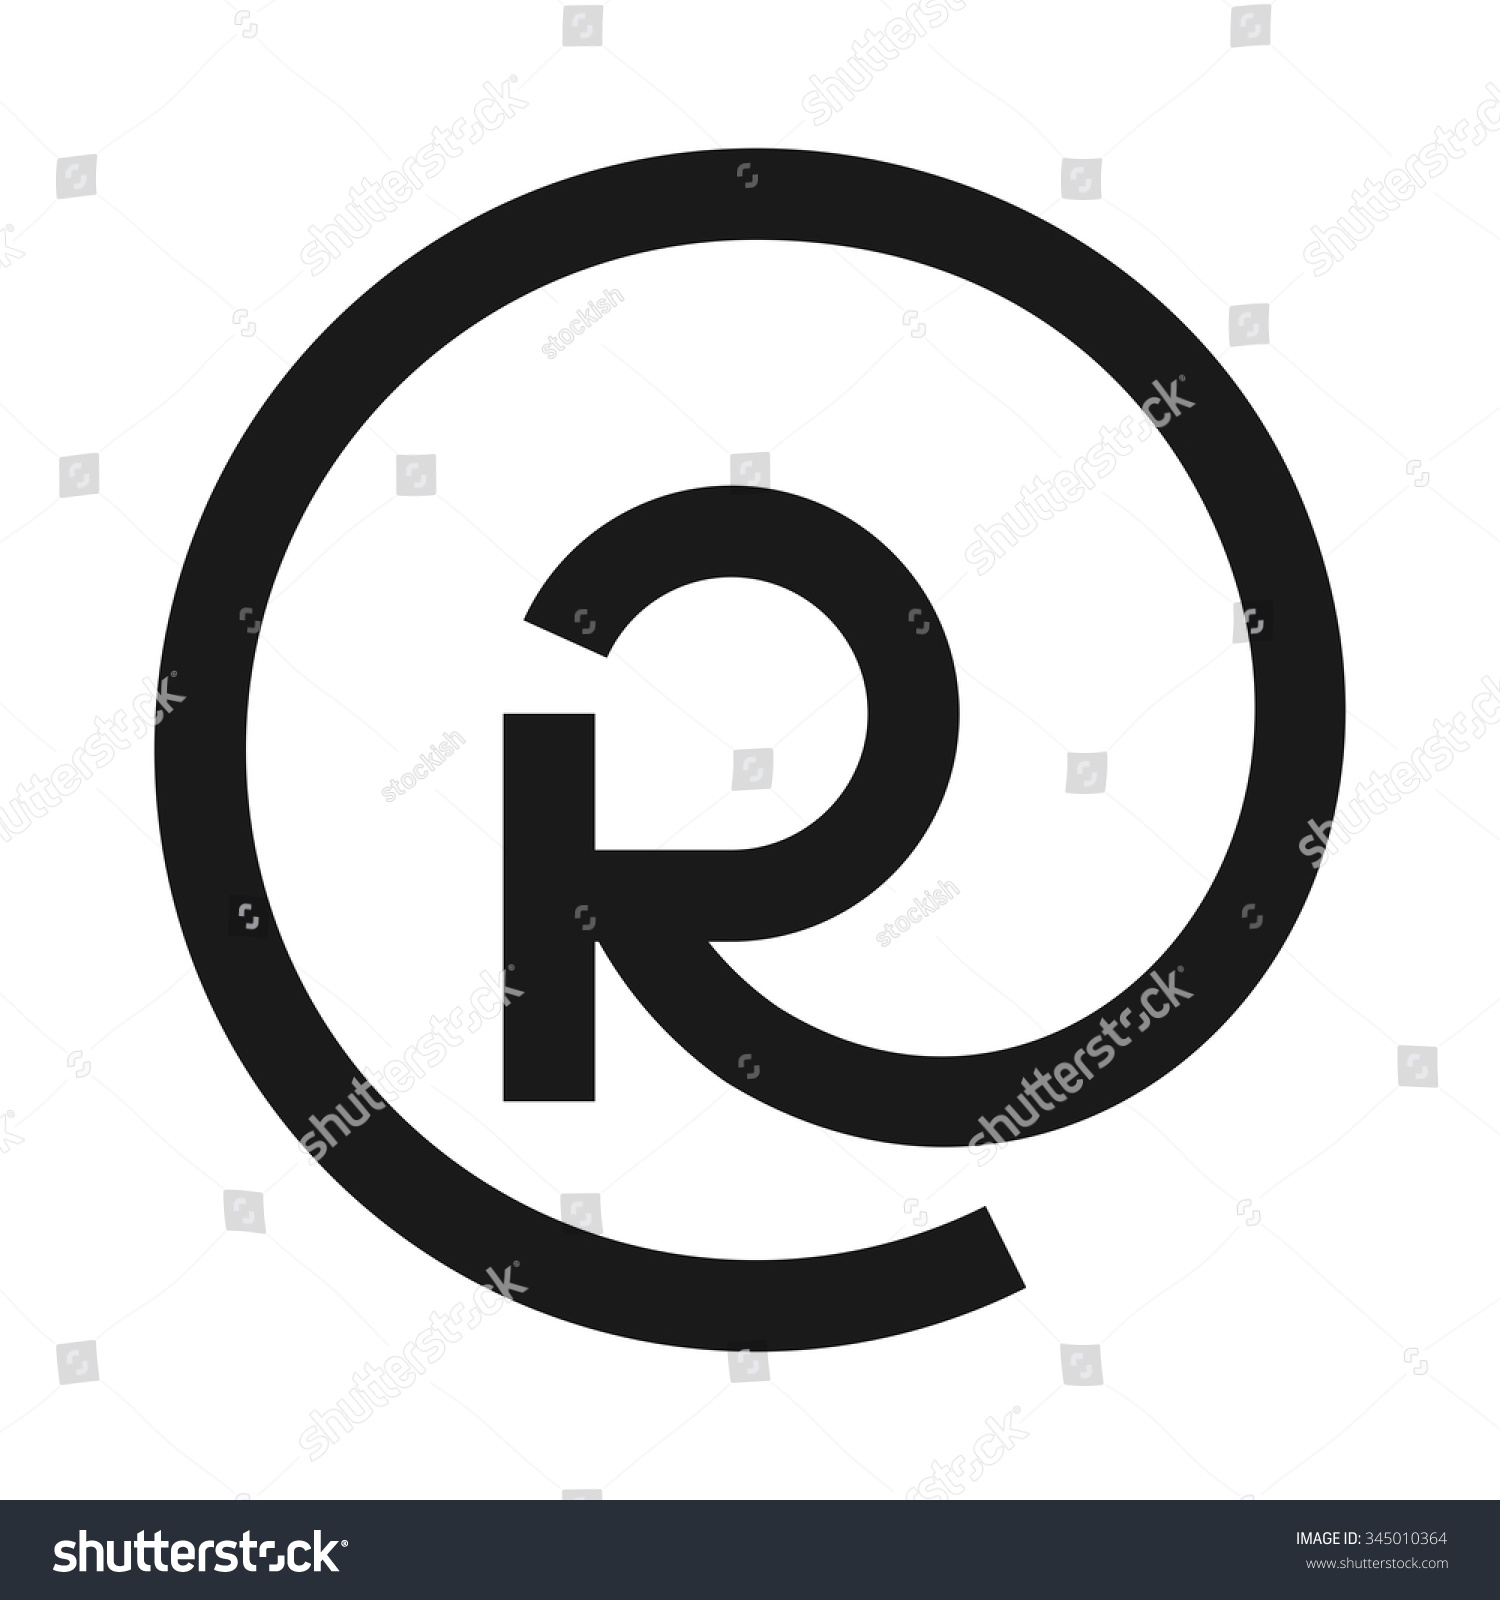 R Logo Vector. Letter R Forming A Circle. - 345010364 : Shutterstock